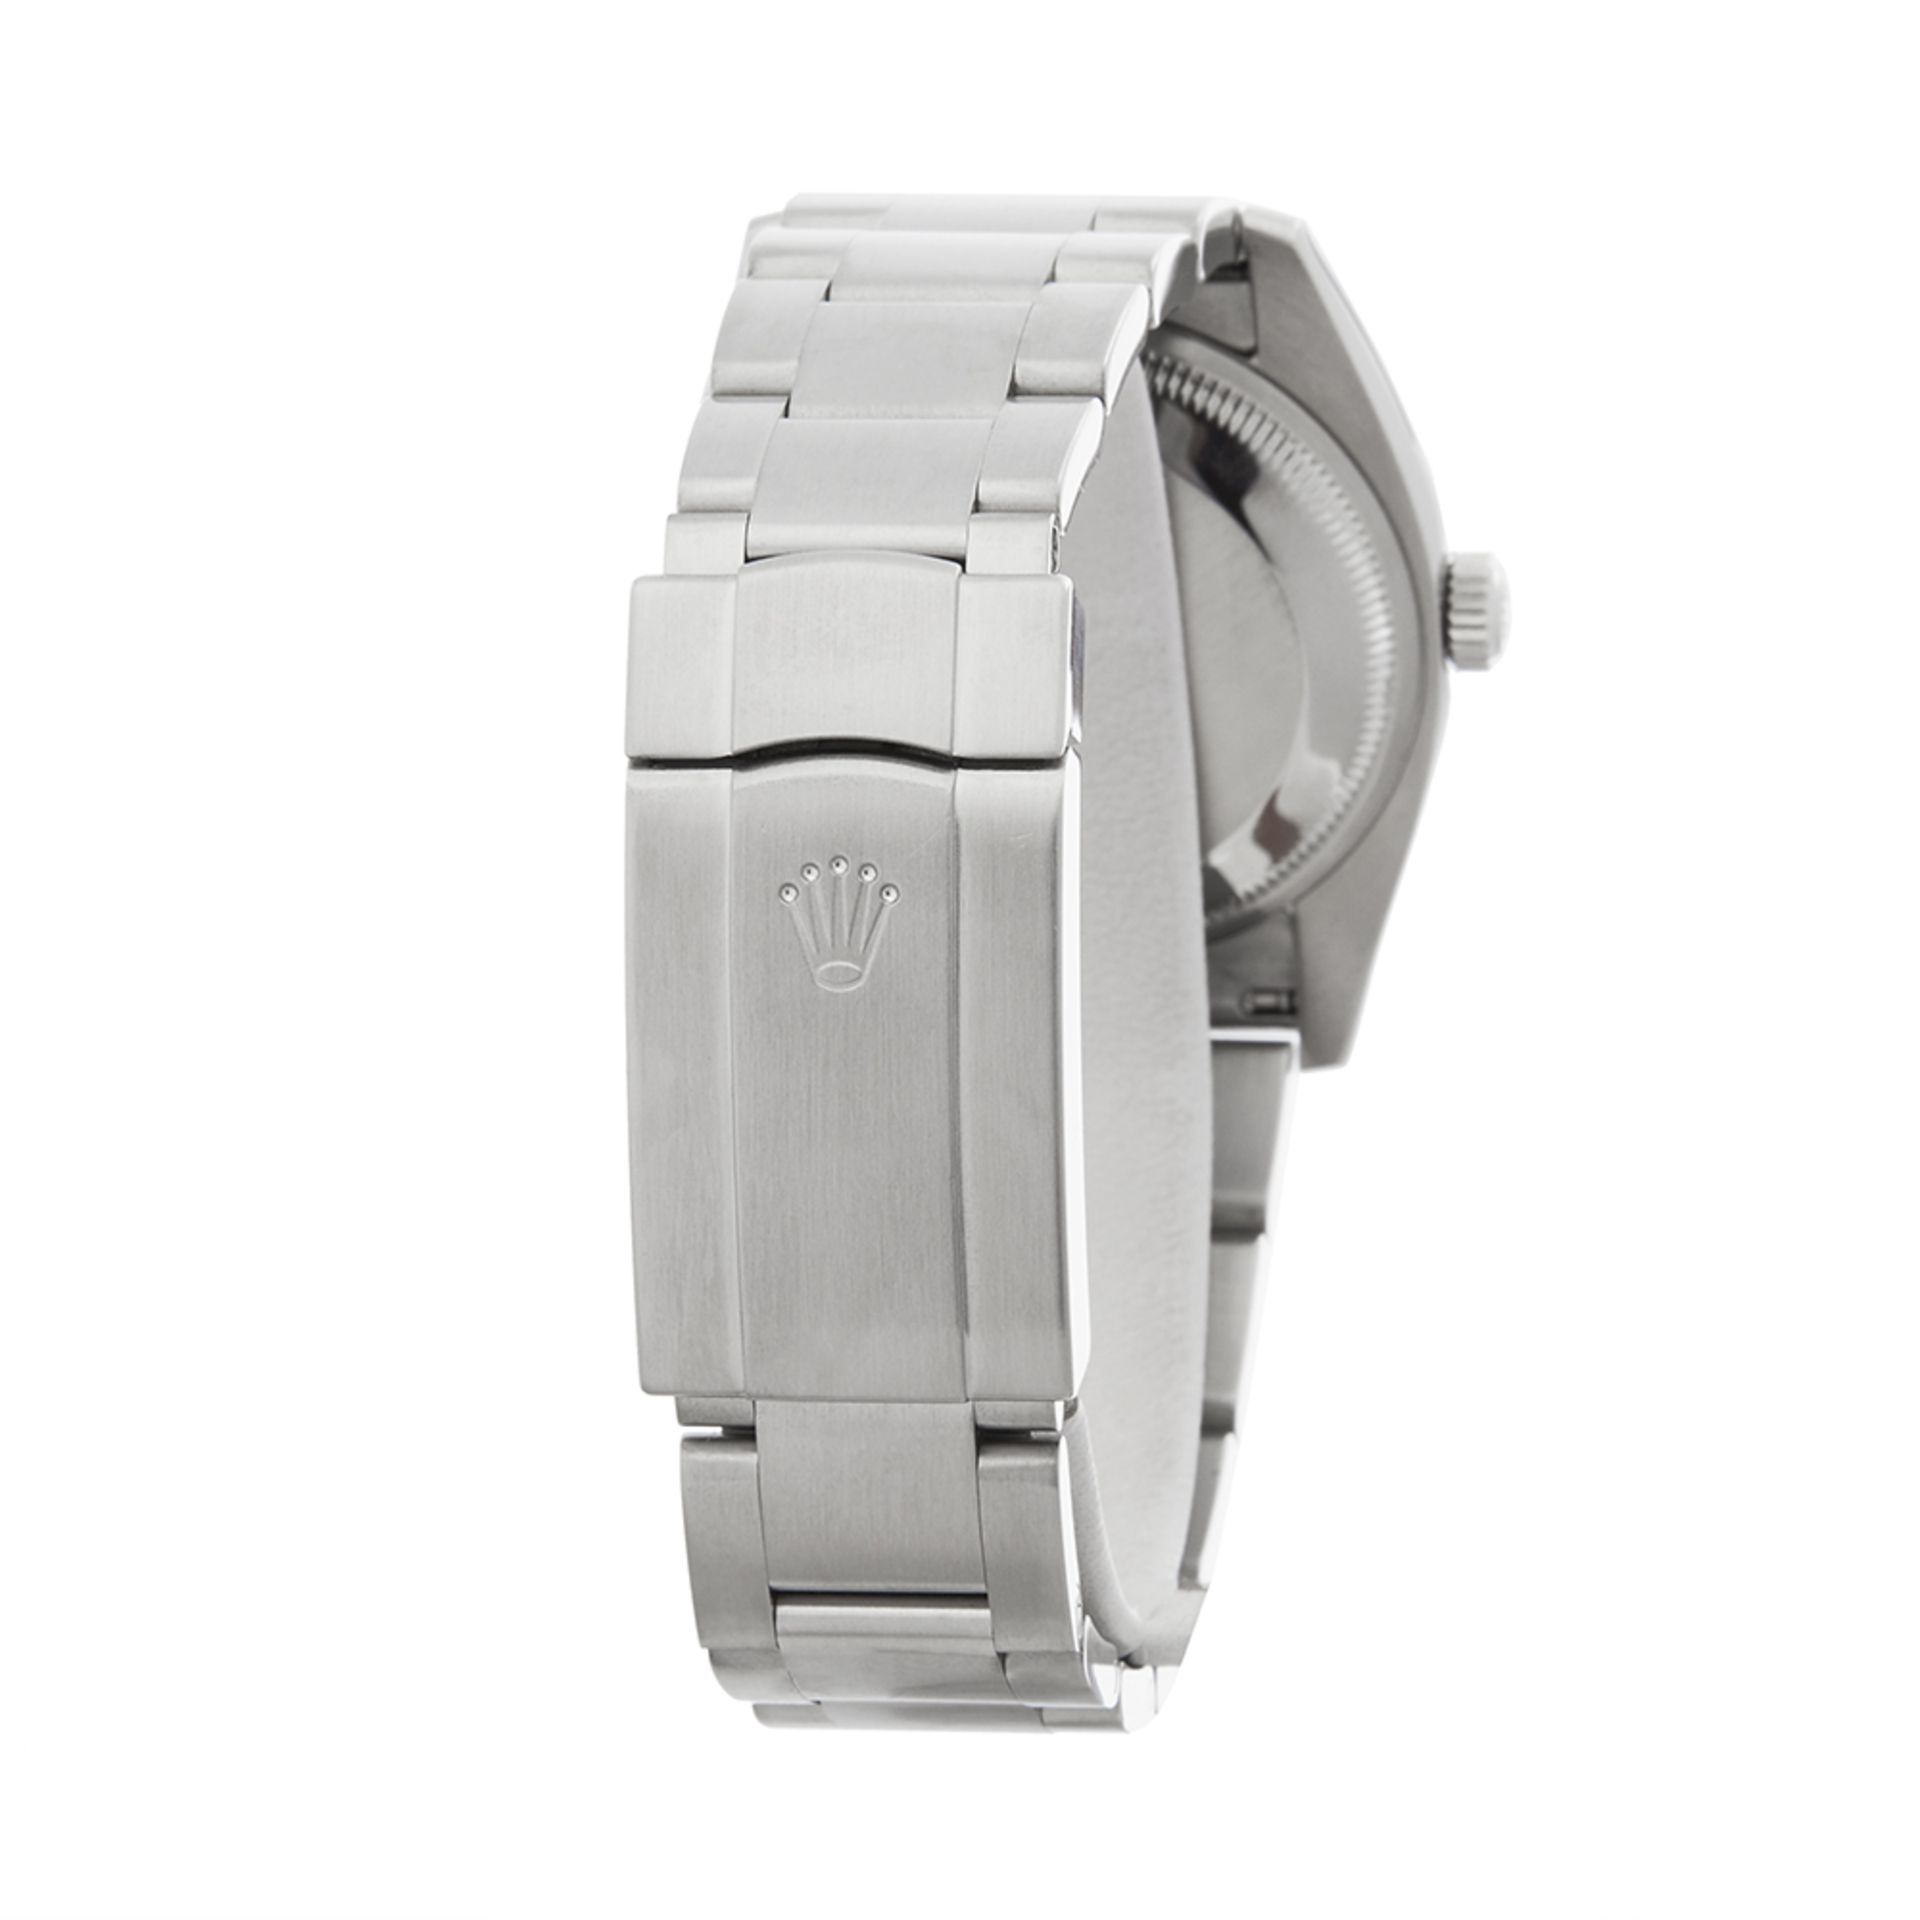 Rolex Air King 34 Stainless Steel - 114200 - Image 6 of 7